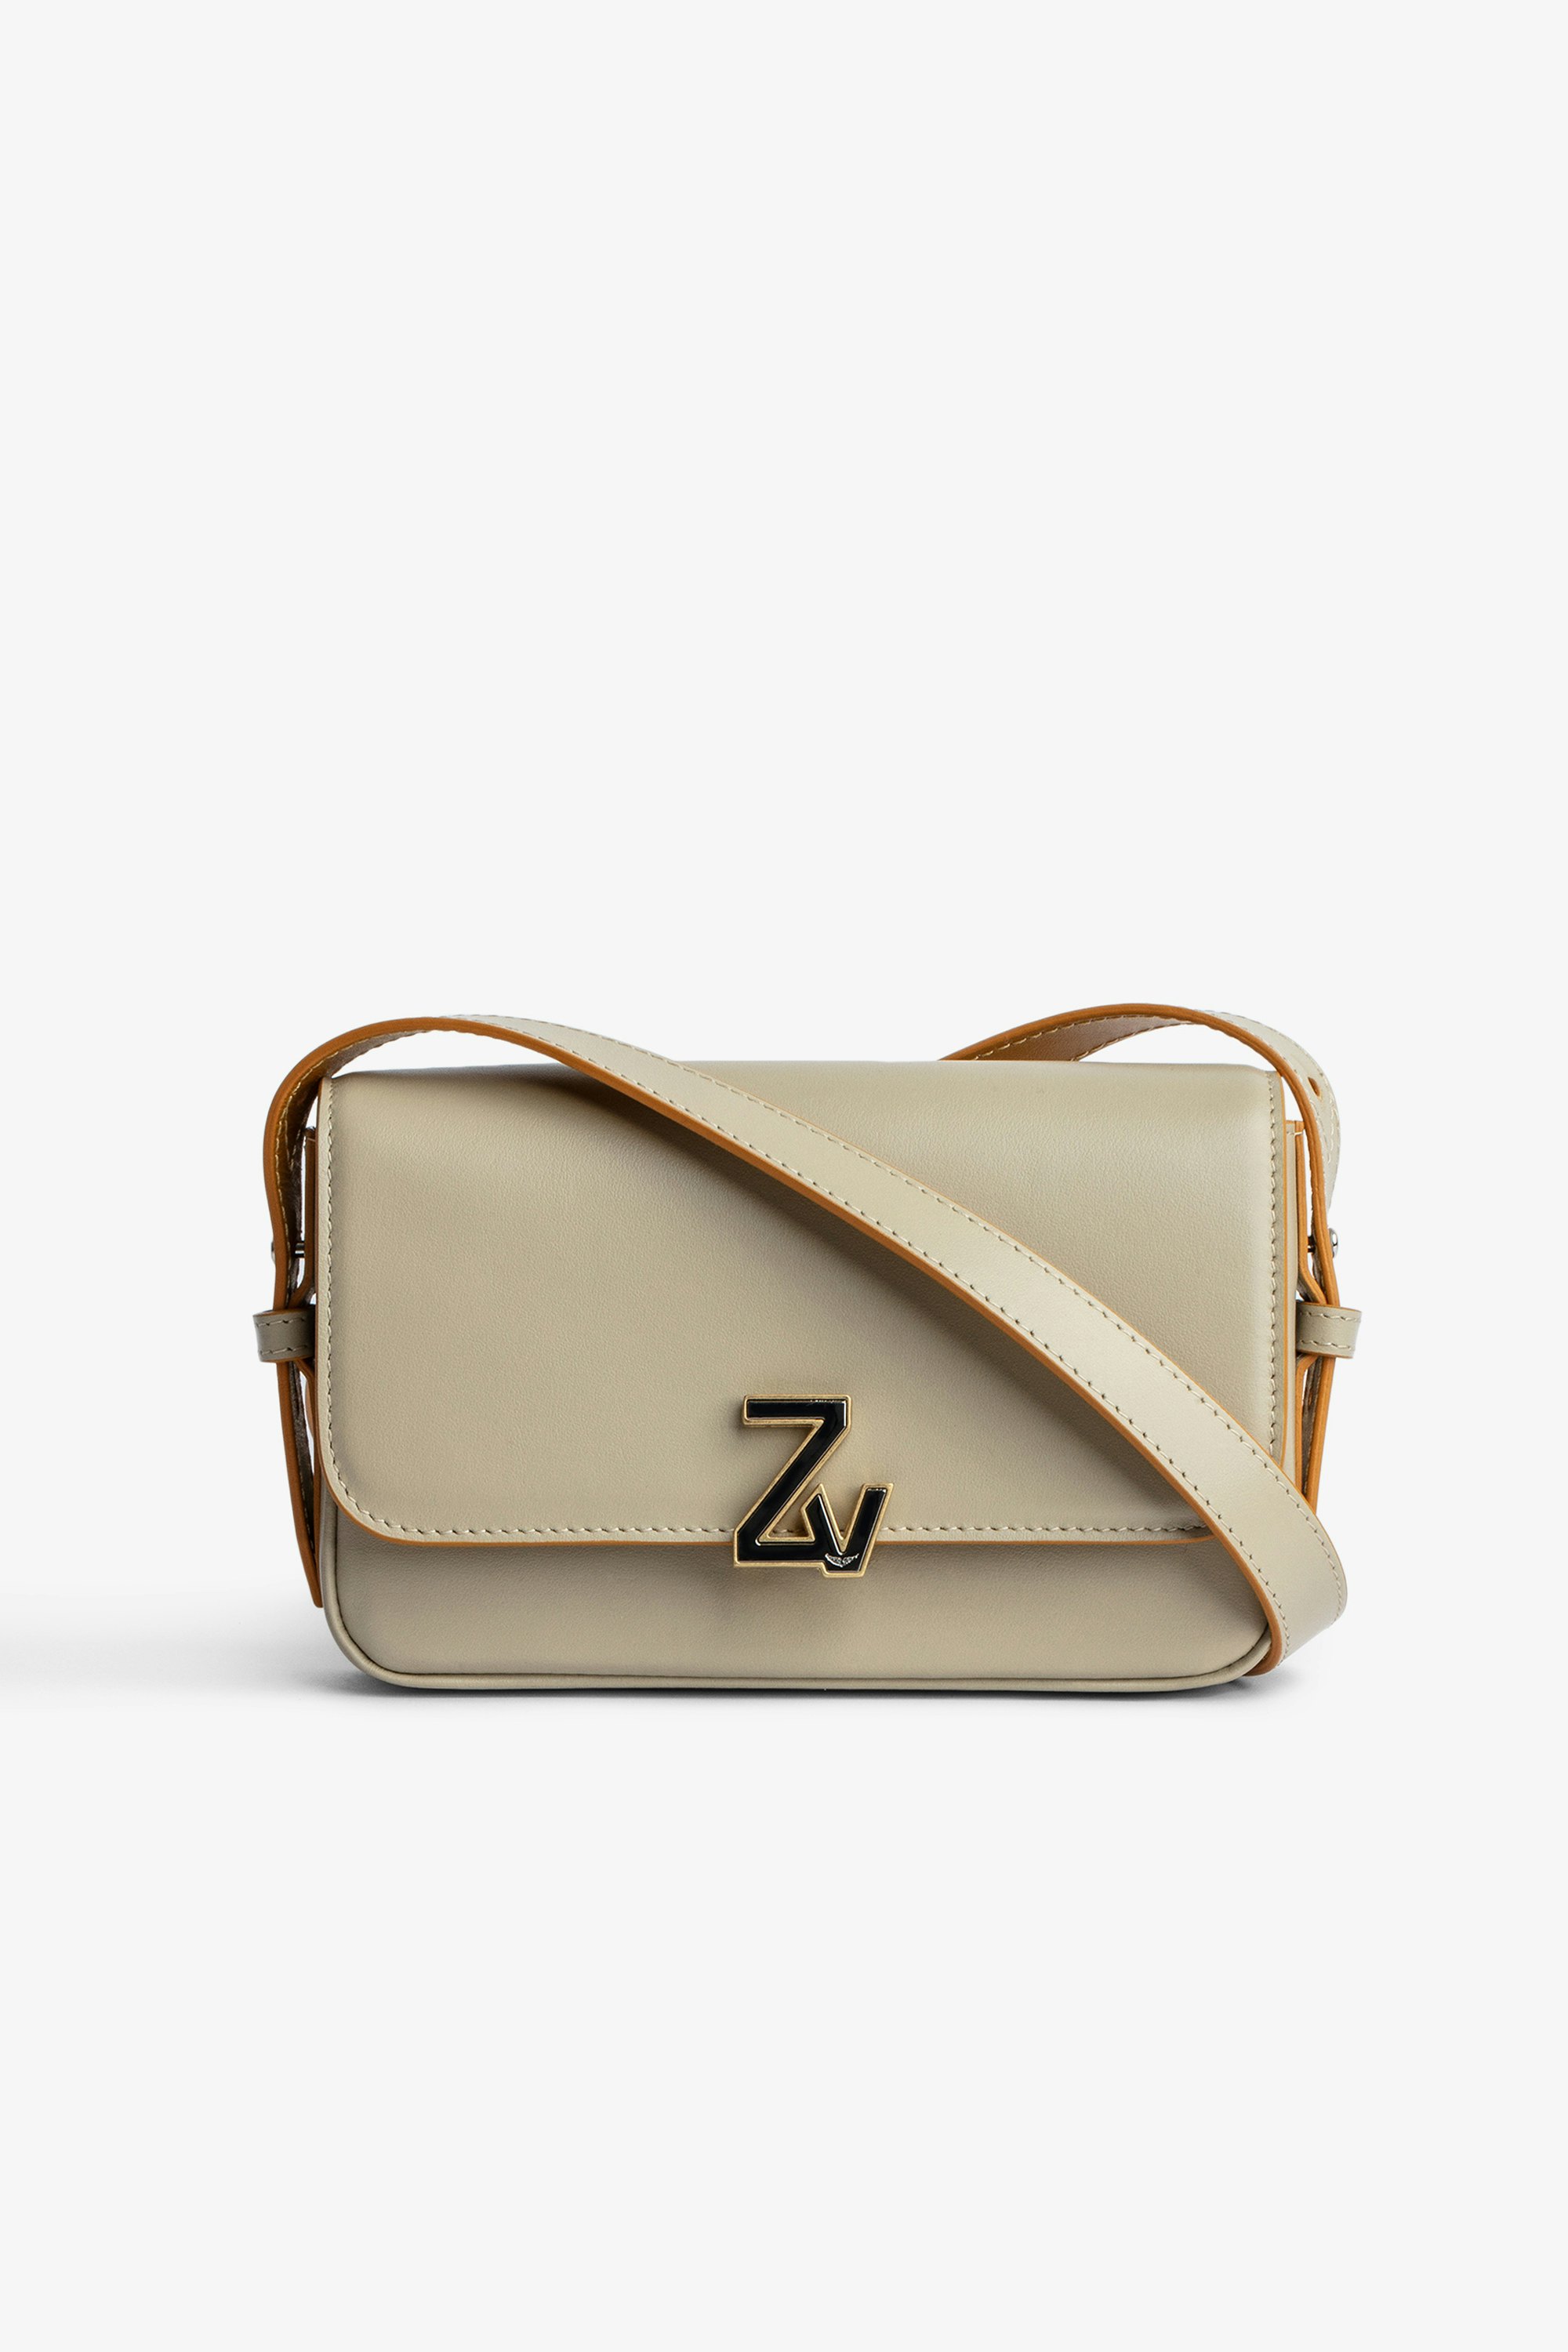 ZV Initiale Le Mini バッグ Women’s small smooth beige leather bag with flap, ZV clasp and a shoulder strap